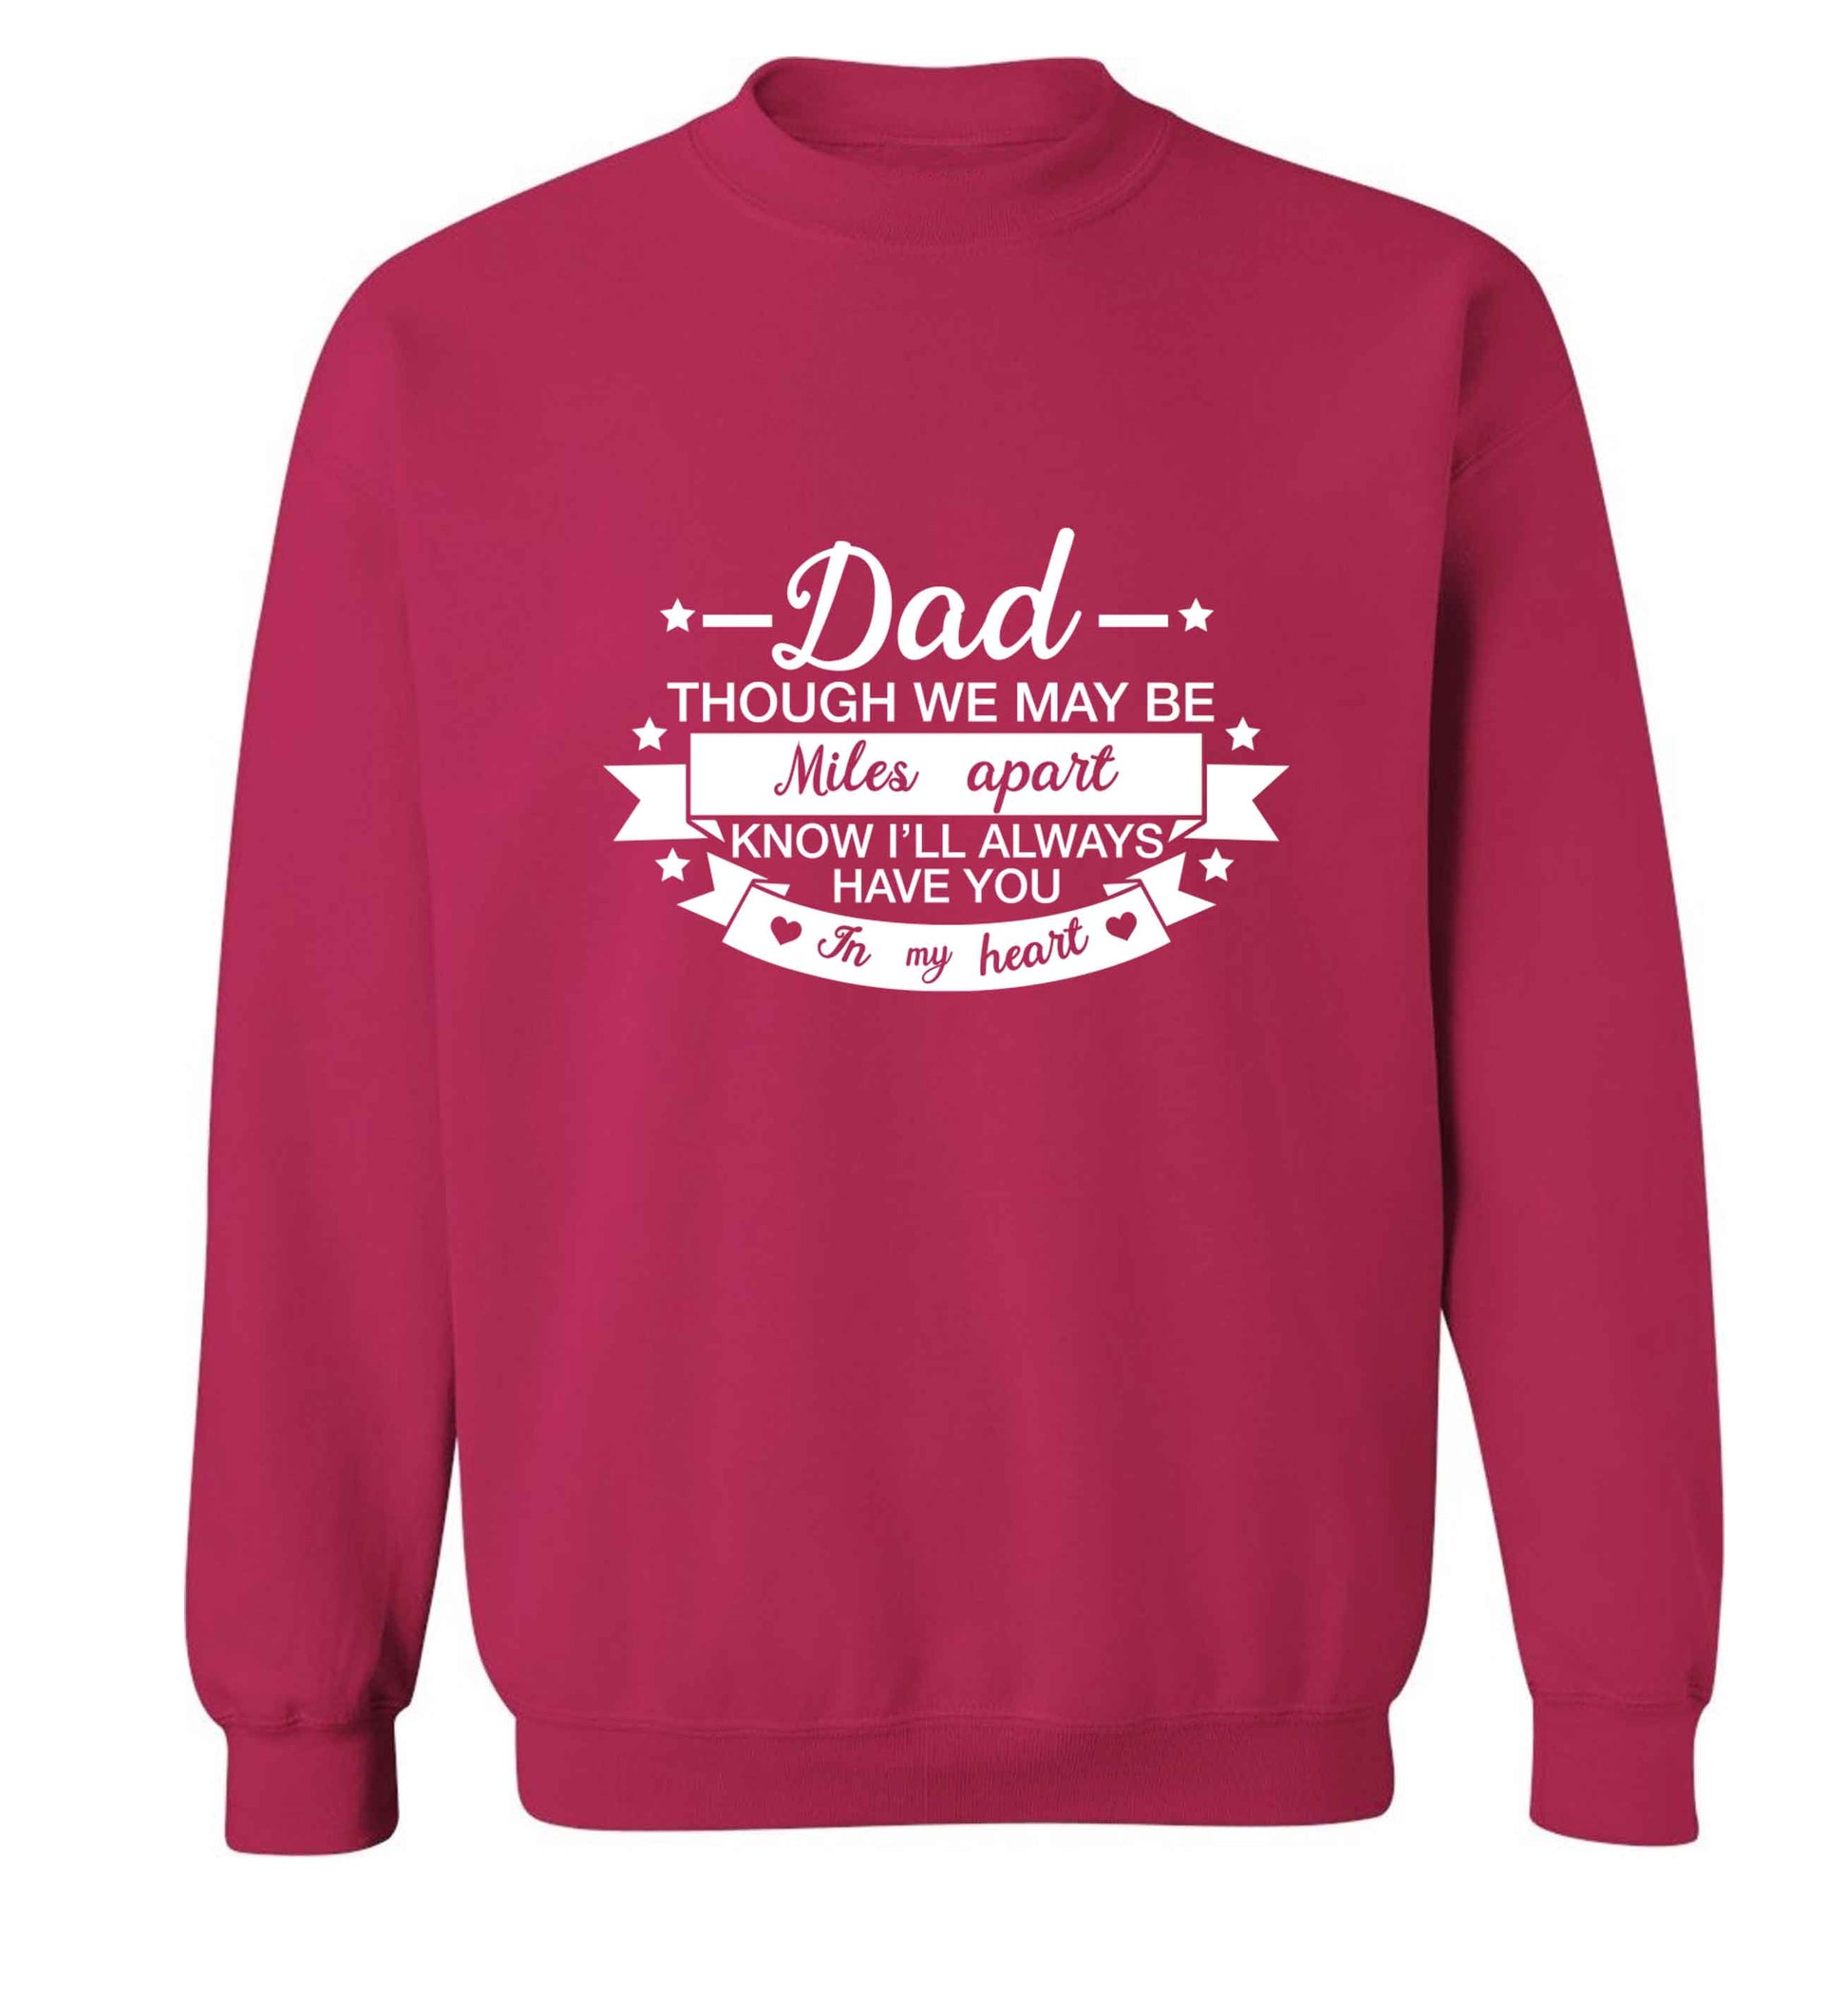 Dad though we are miles apart know I'll always have you in my heart adult's unisex pink sweater 2XL